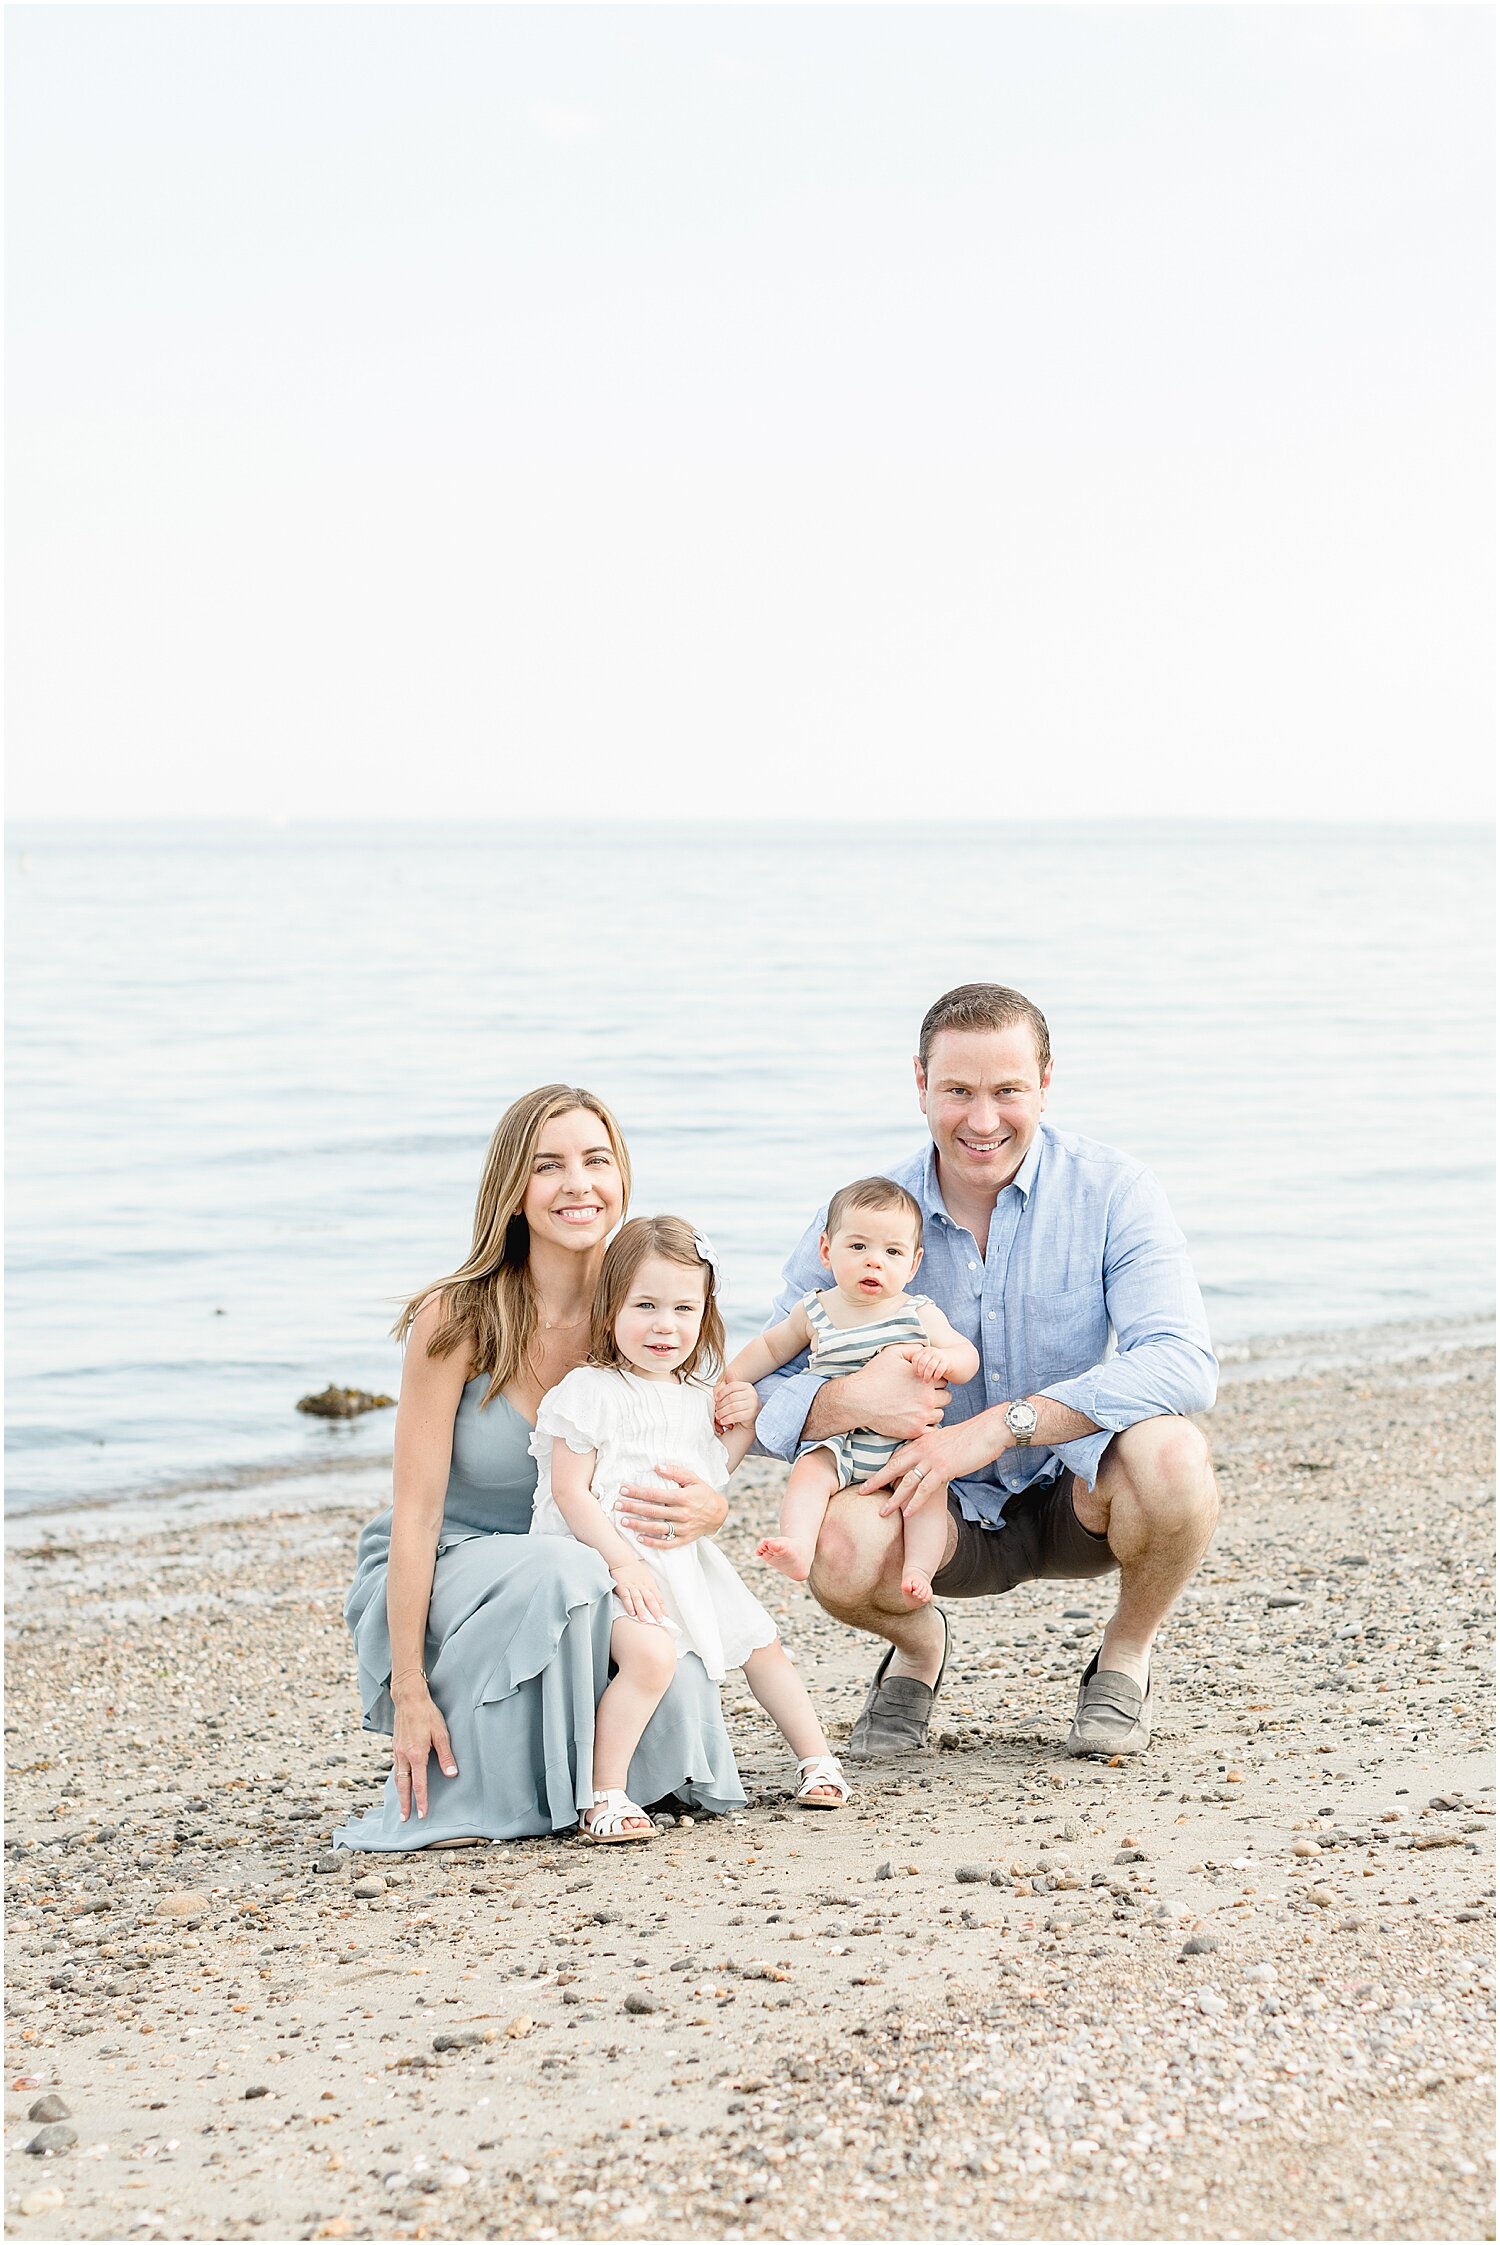 Westport Beach Session. Photos by Connecticut Family Photographer, Kristin Wood Photography.